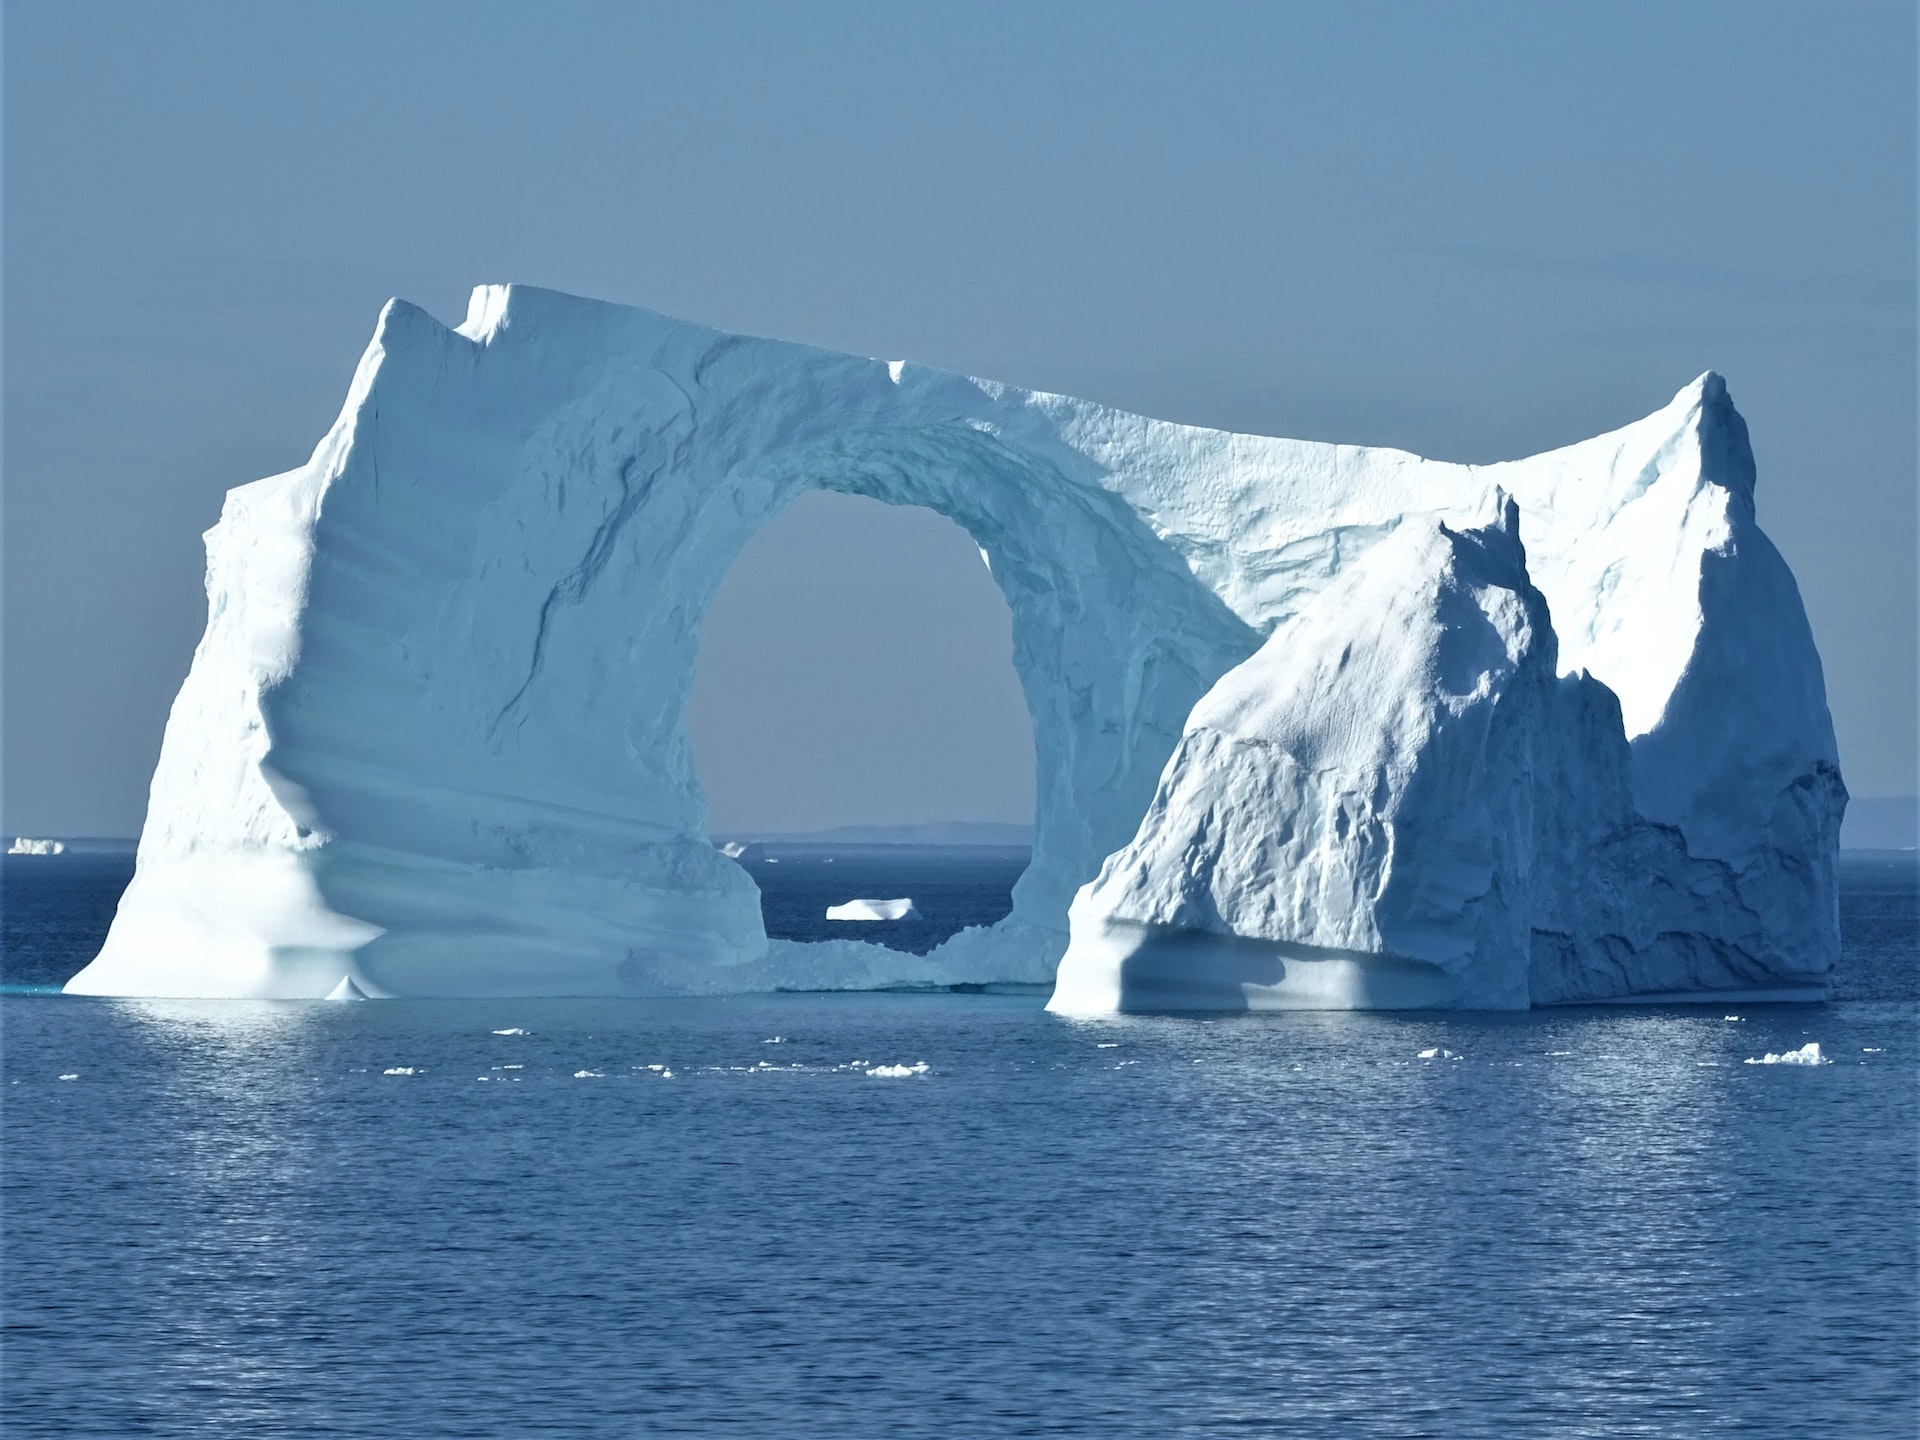 A giant iceberg floating alone on the sea, with an enormous hole near the middle part